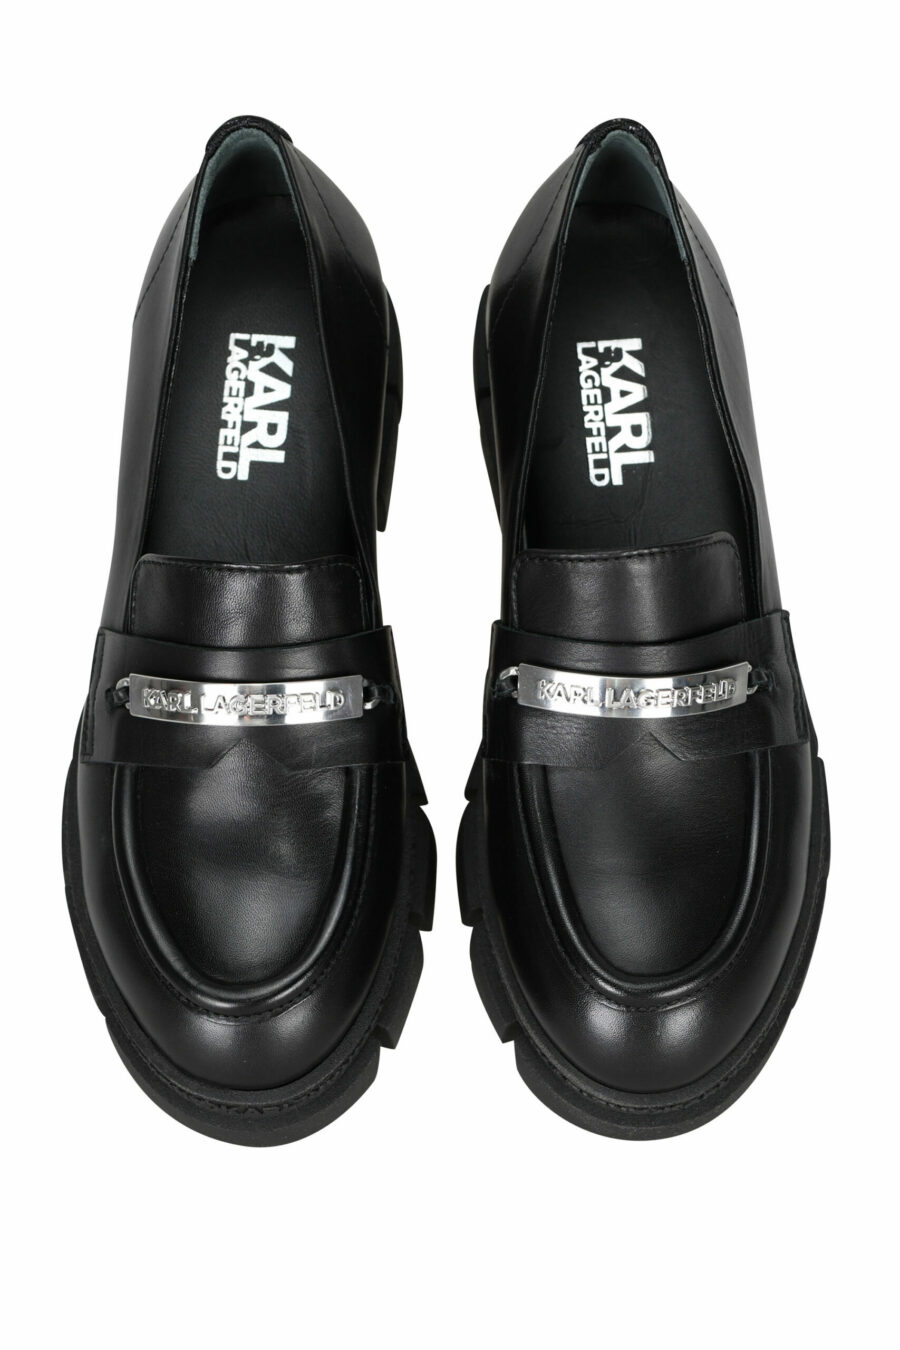 Black loafers with mini-logo and platform - 5059529284977 4 scaled